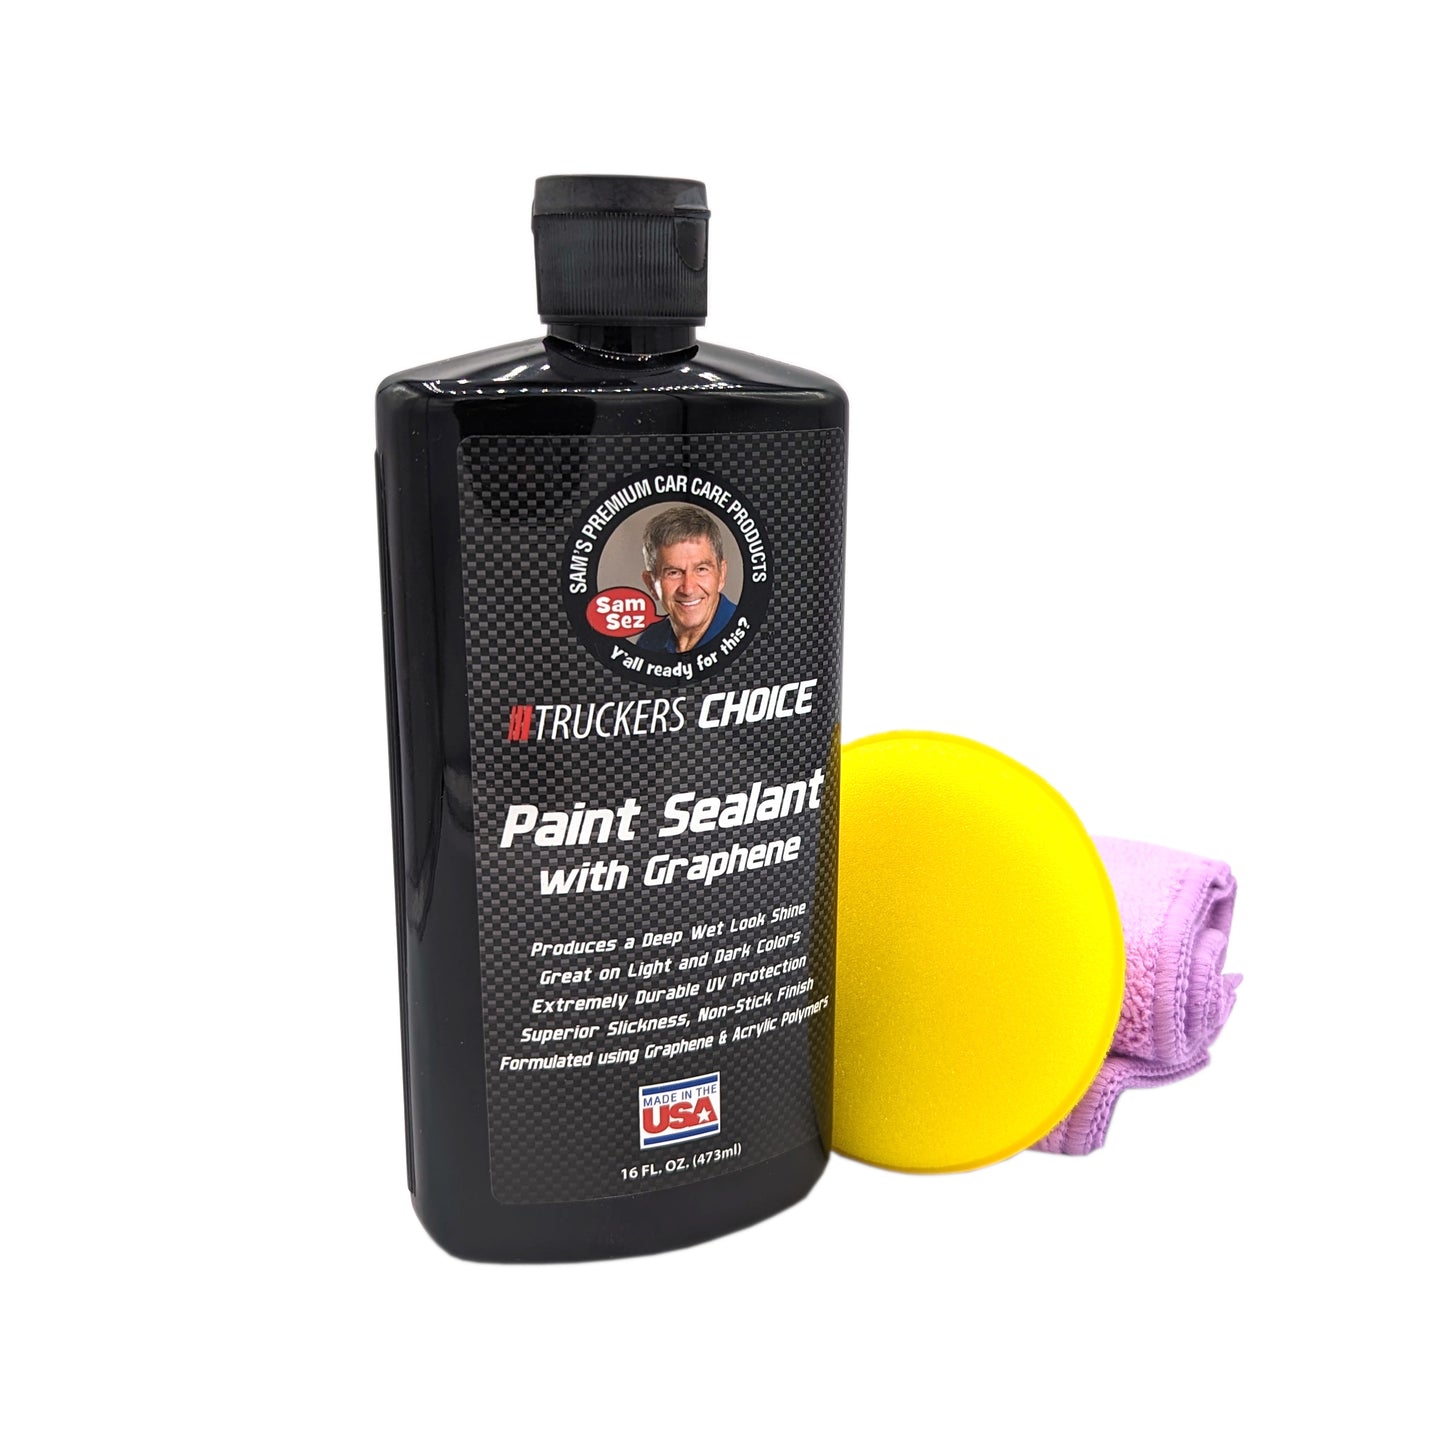 Truckers Choice Paint Sealant with Applicator